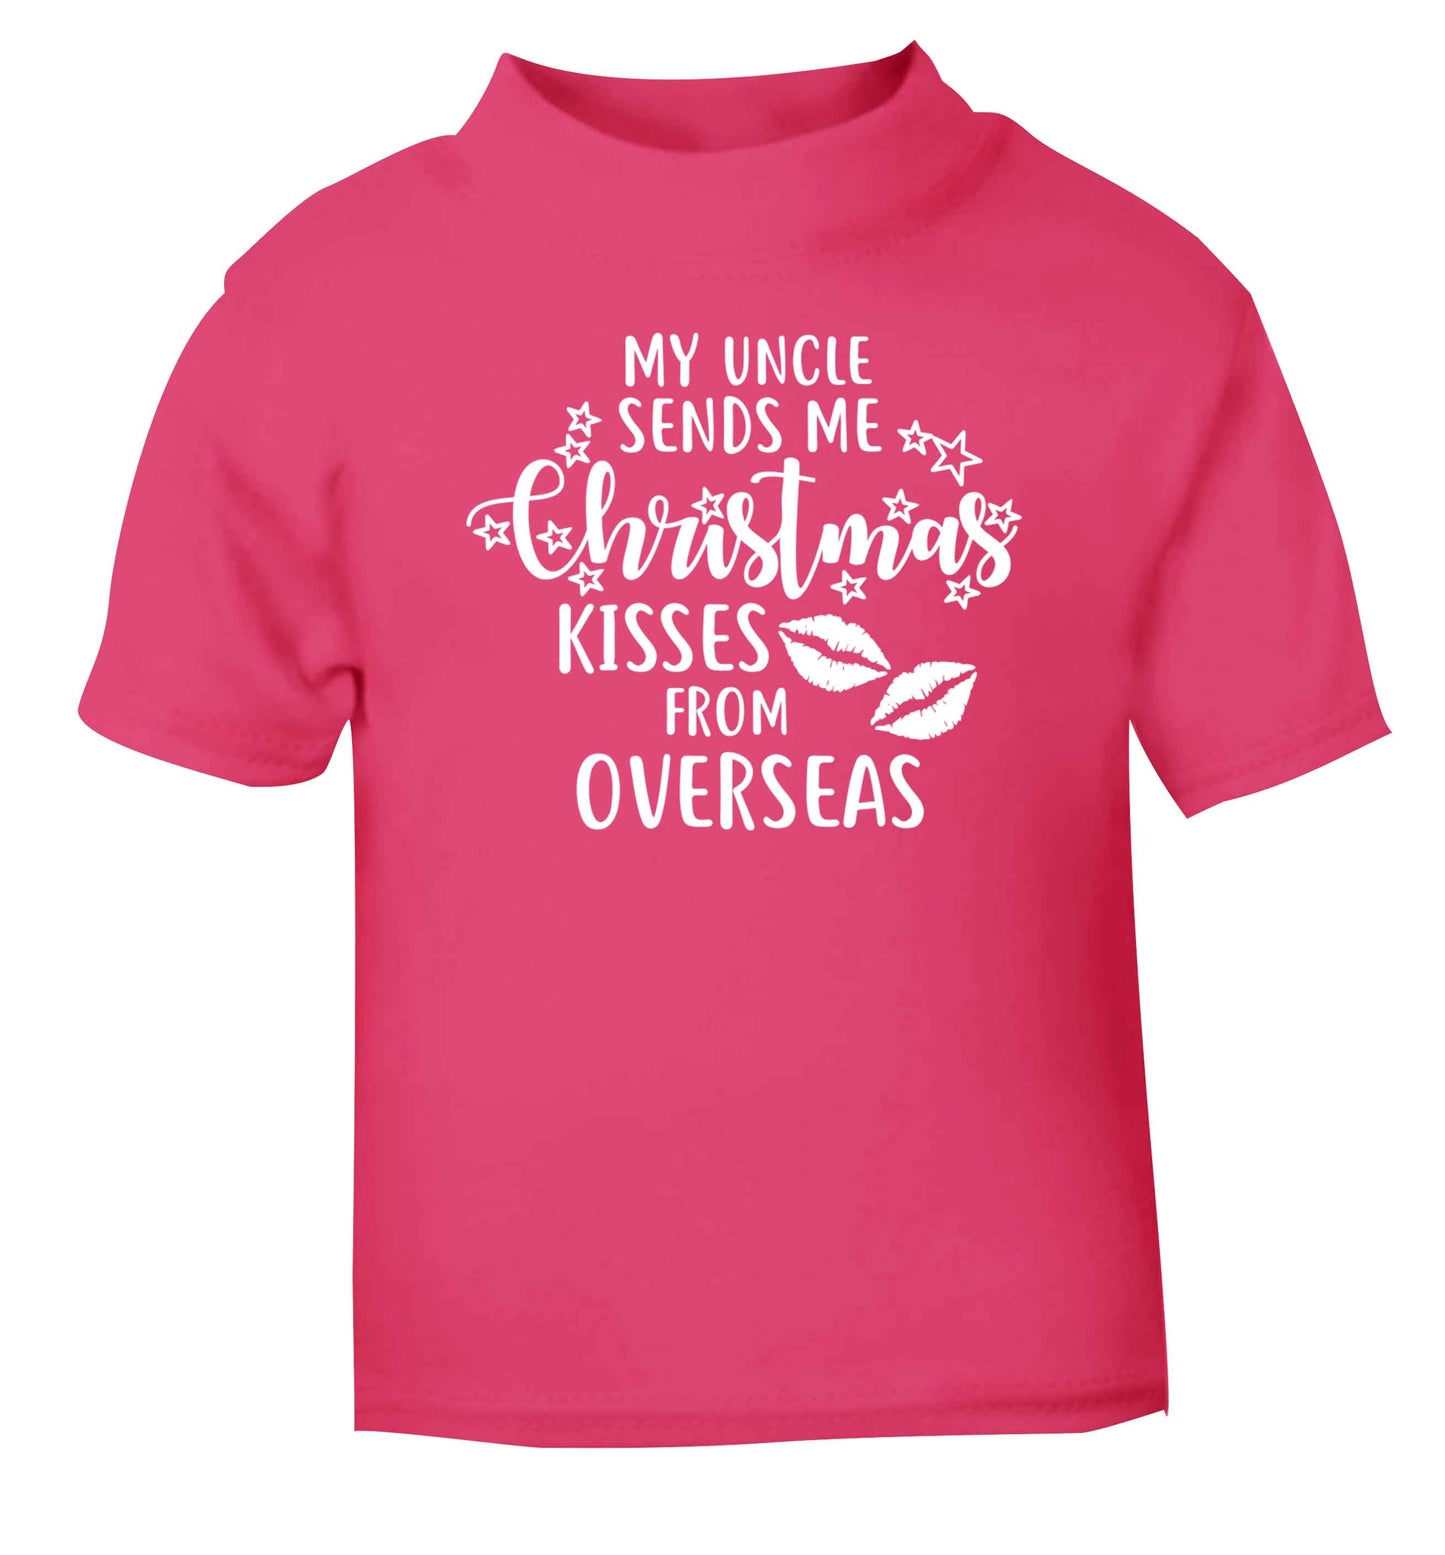 Brother Christmas Kisses Overseas pink baby toddler Tshirt 2 Years